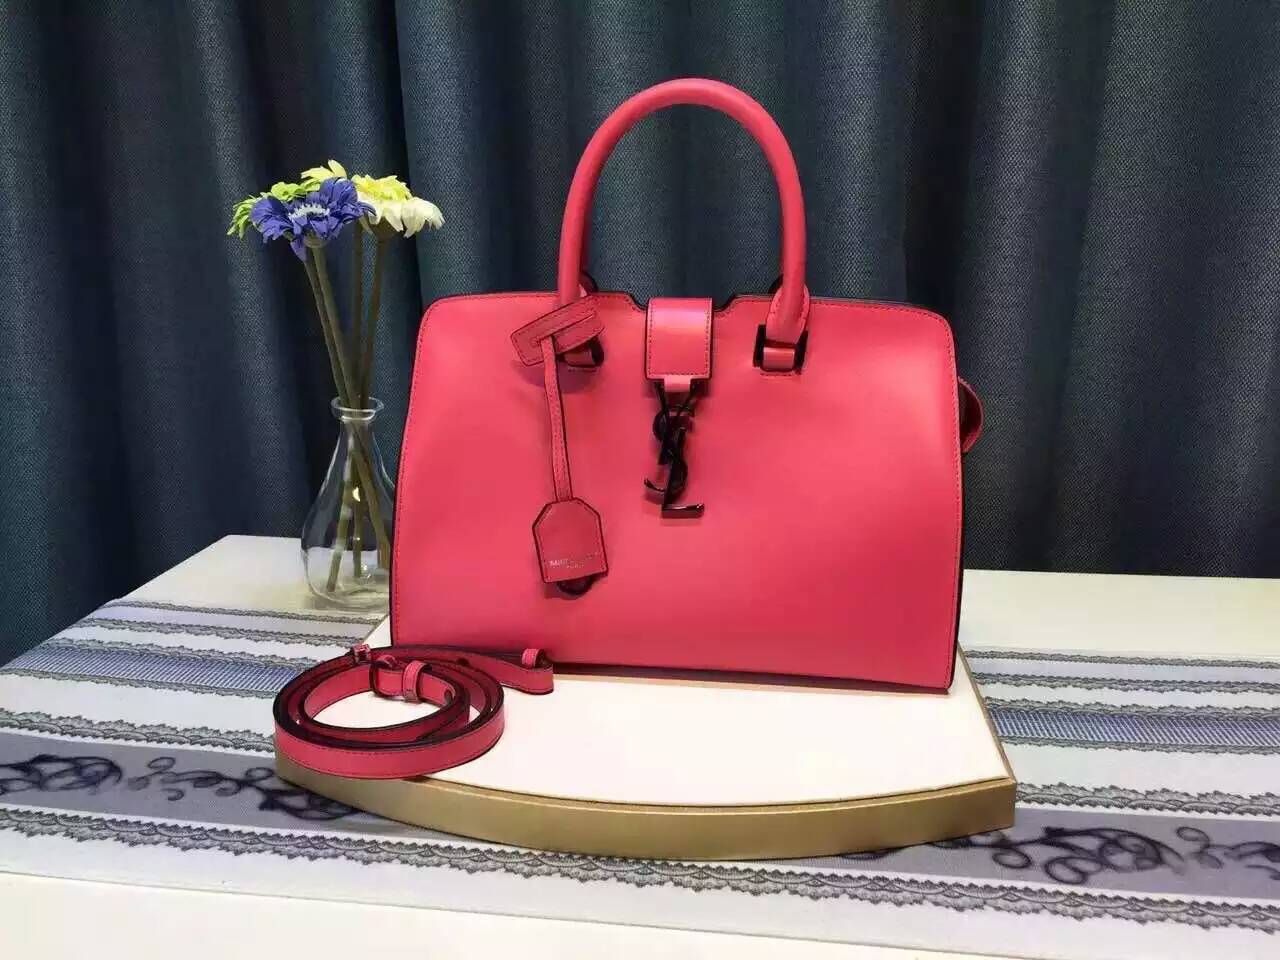 Limited Edition!2016 YSL Collection Outlet-Saint Laurent Small Monogram Cabas Bag in Fuchsia Leather